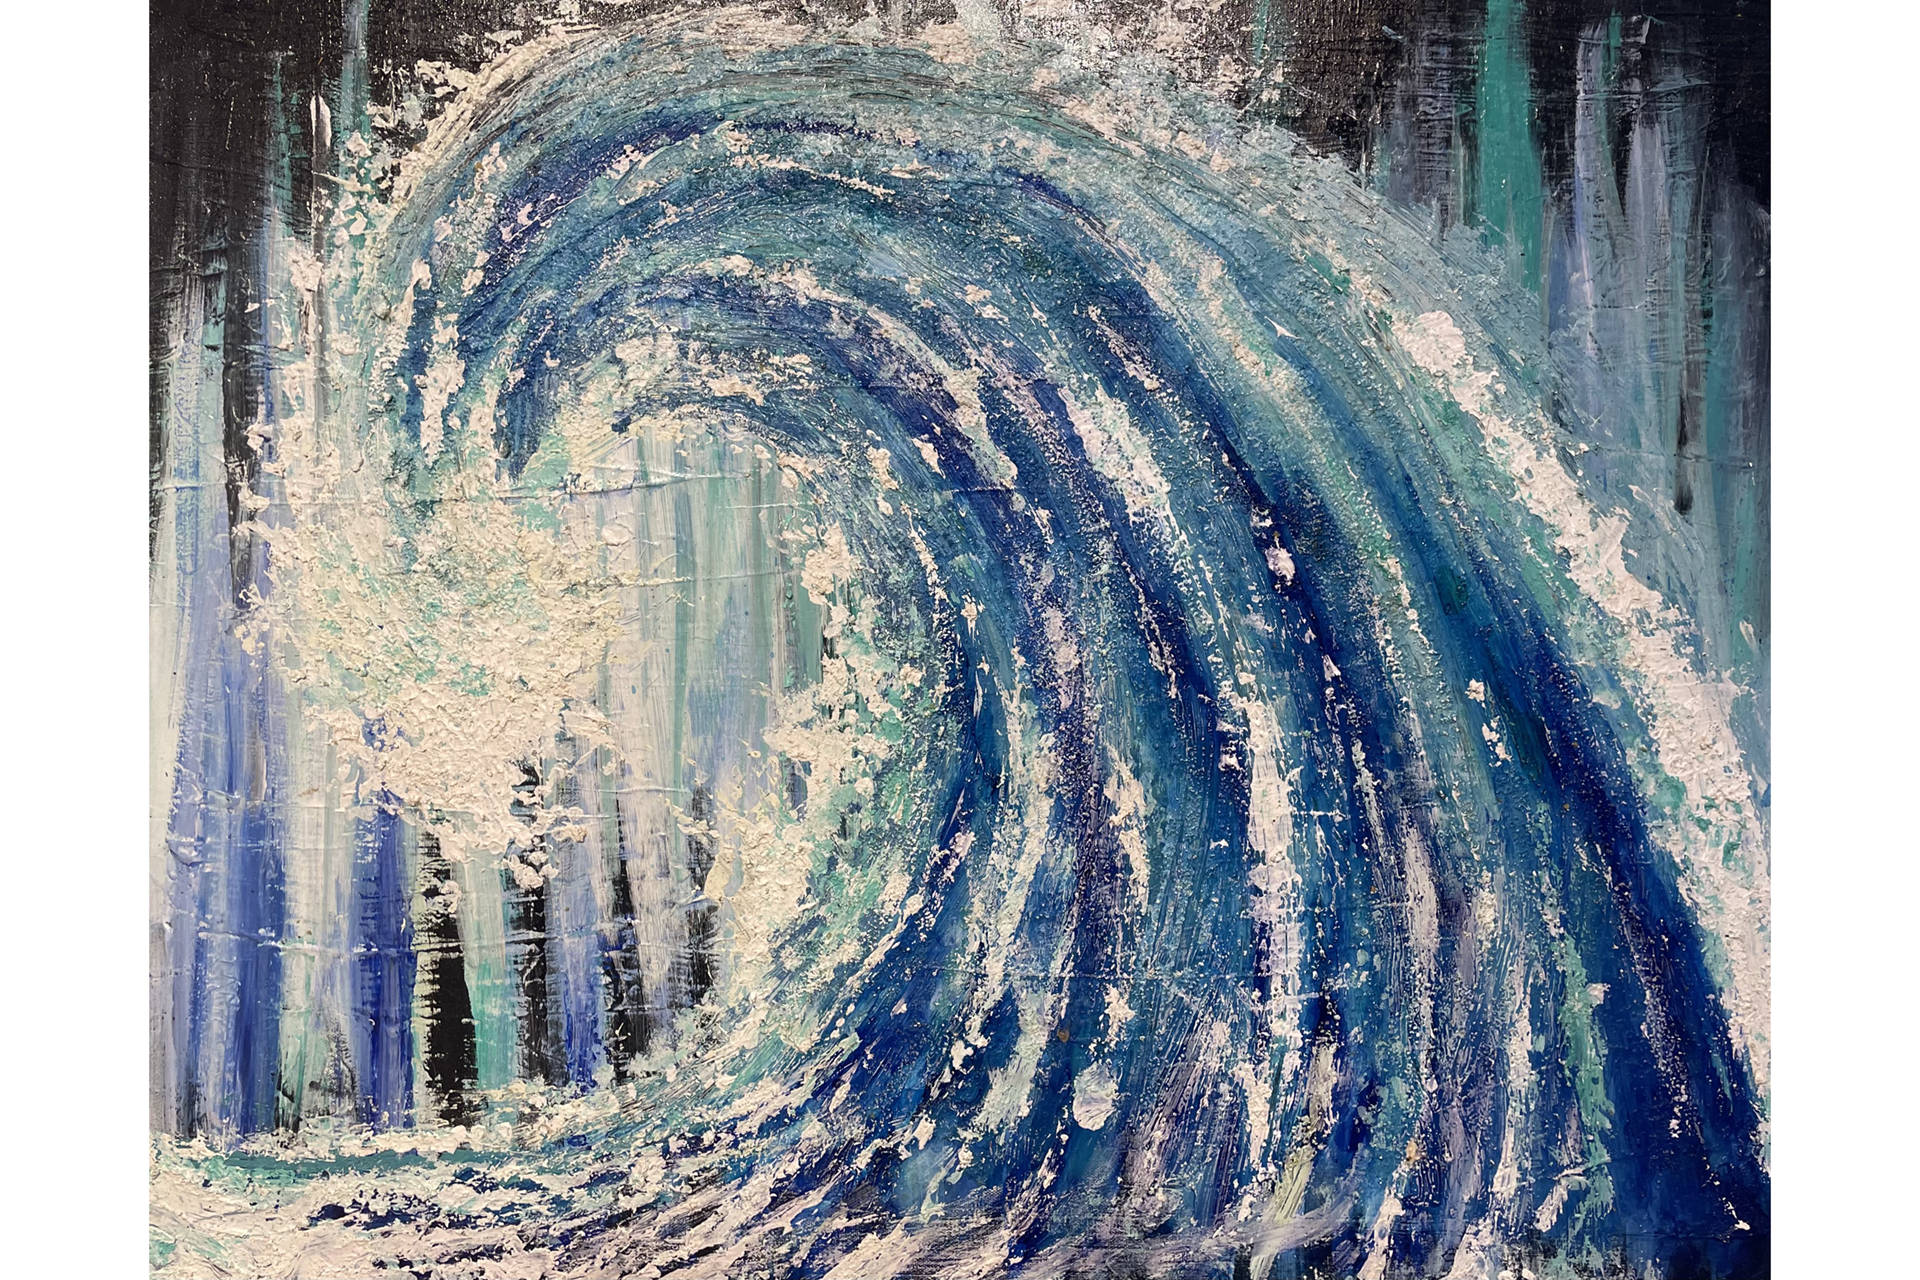 Abstract painting of a wave breaking